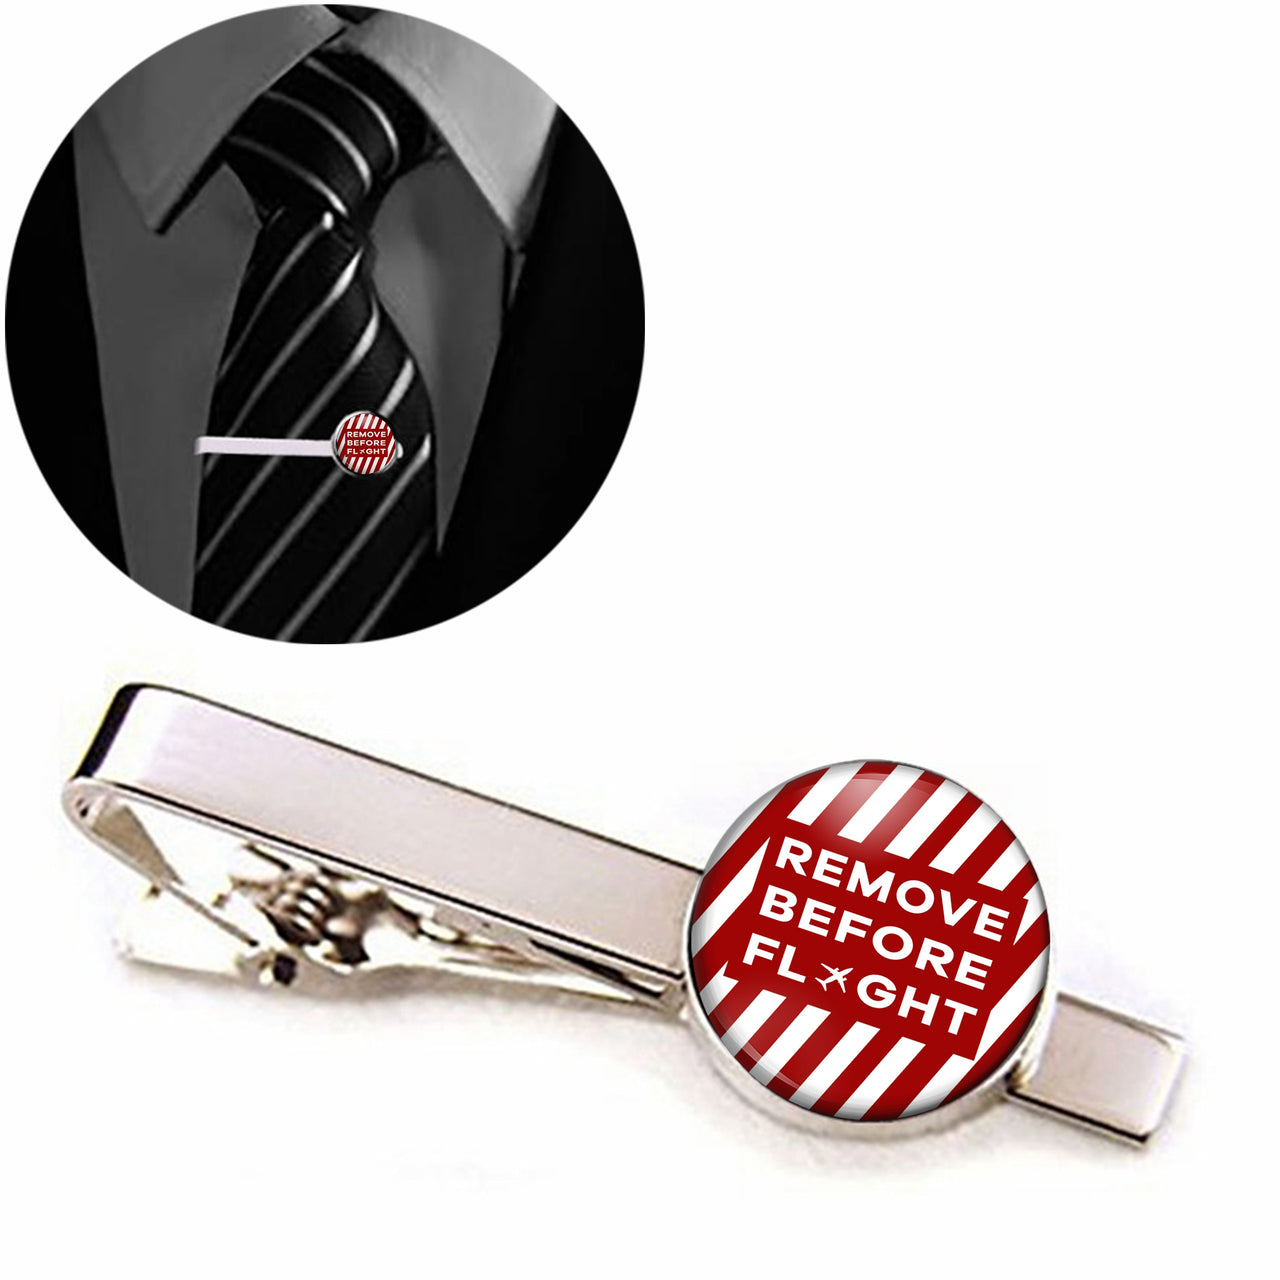 Special Edition Remove Before Flight Designed Tie Clips